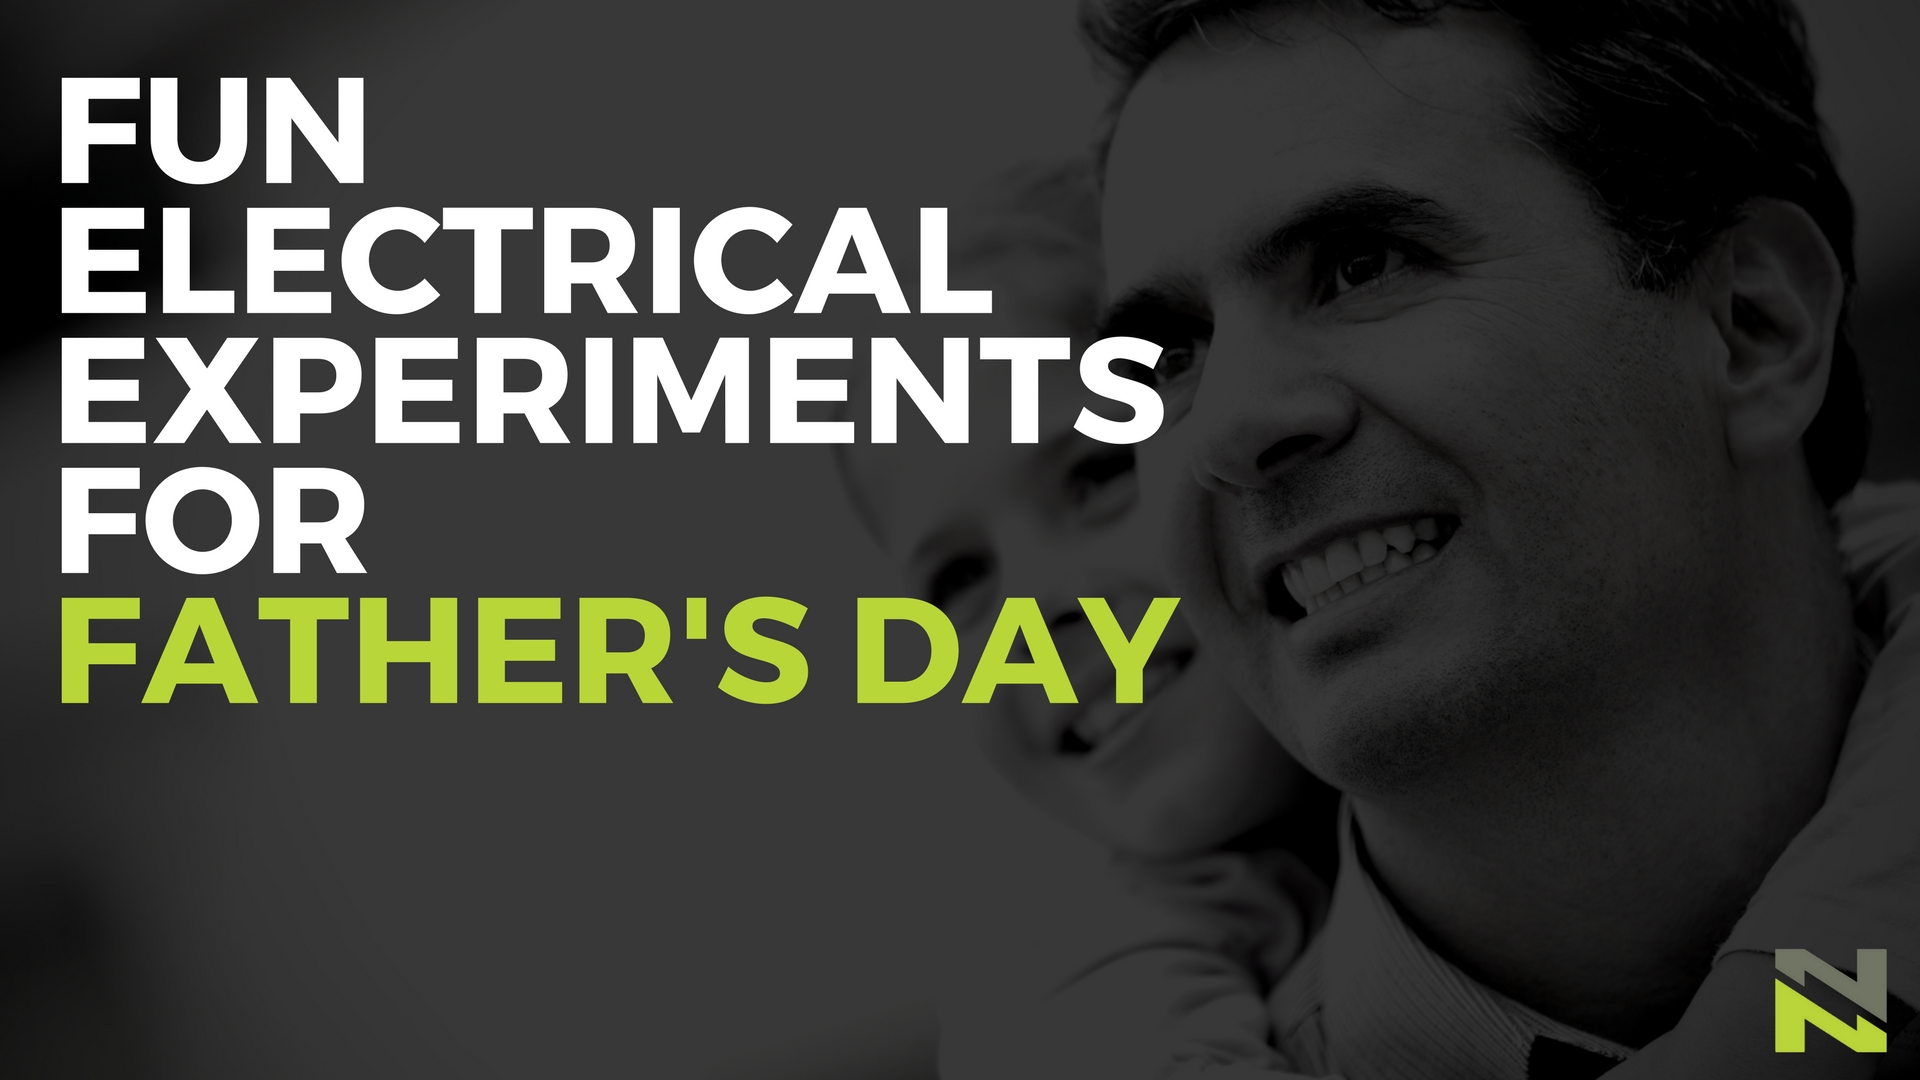 Fun Electrical Experiments for Father’s Day